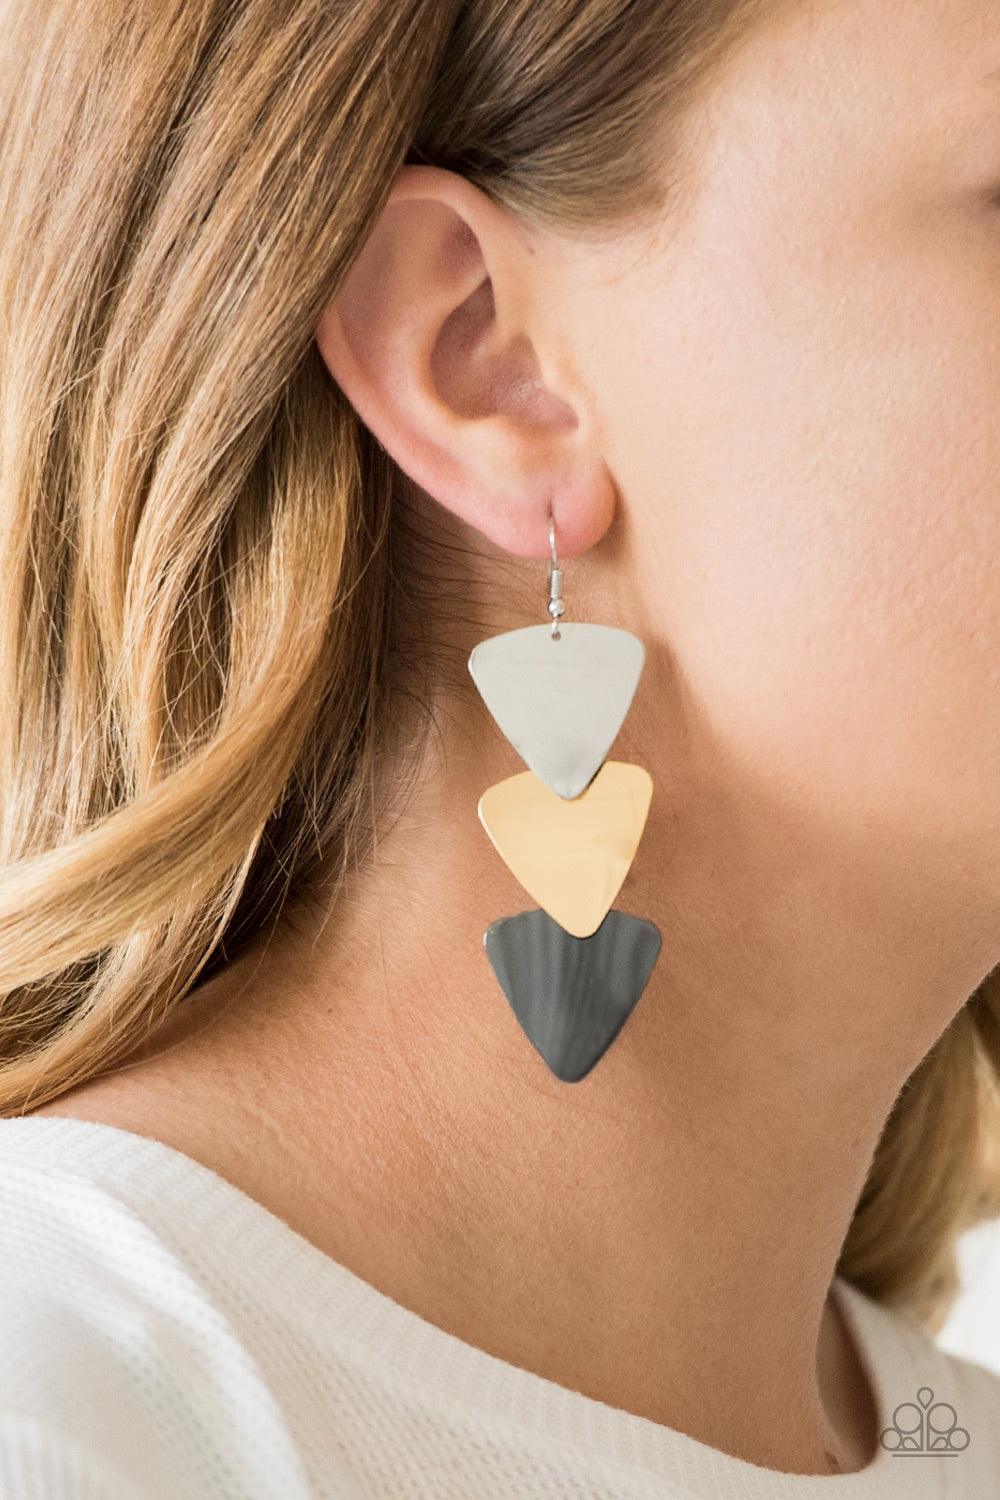 Paparazzi Accessories Terra Trek - Multi Brushed in a high-sheen shimmer, glistening silver, gold, and gunmetal triangular frames cascade from the ear, creating an edgy lure. Earring attaches to a standard fishhook fitting. Jewelry